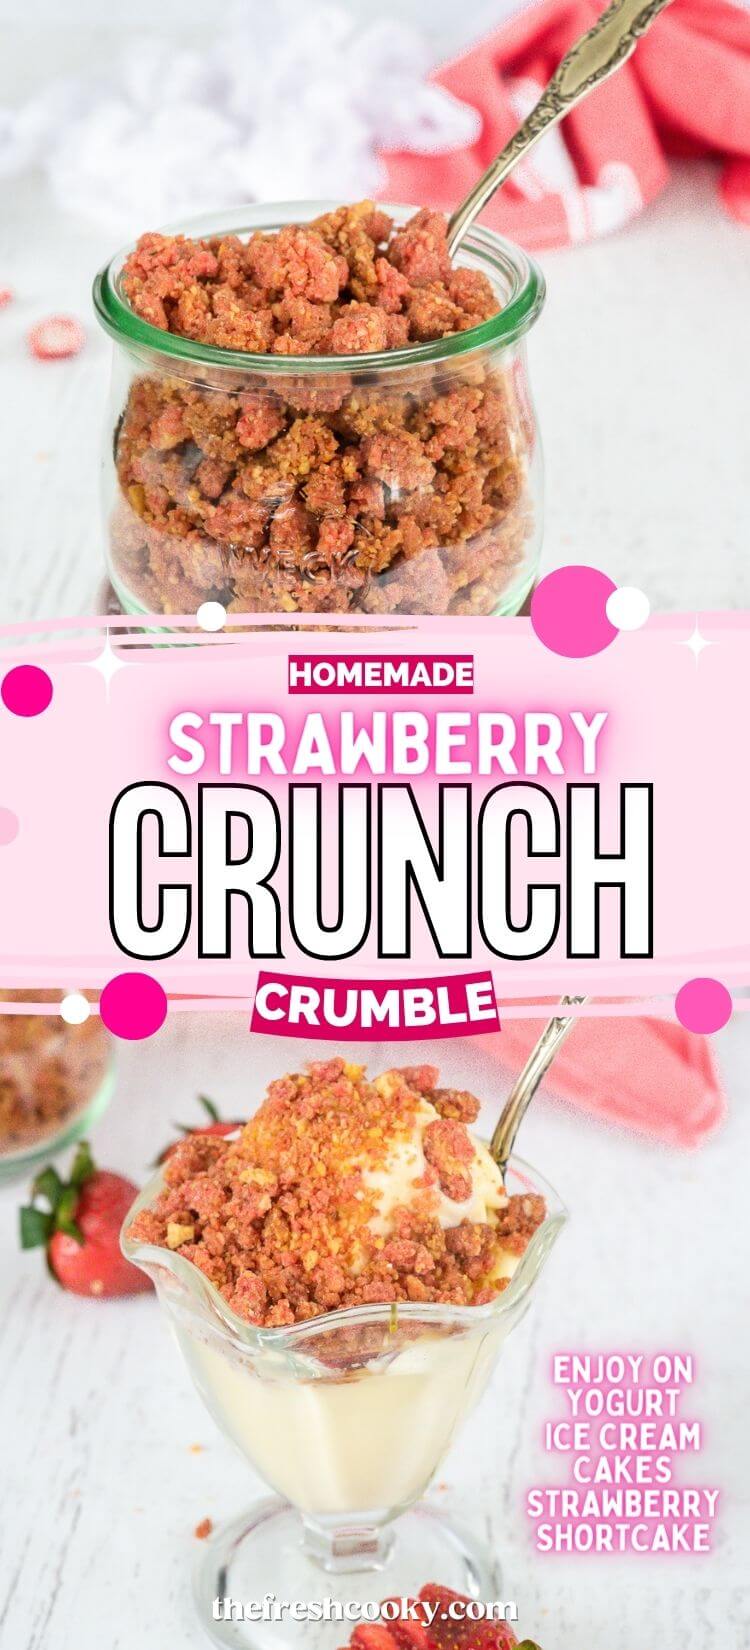 Easy Strawberry Crunch Recipe • The Fresh Cooky